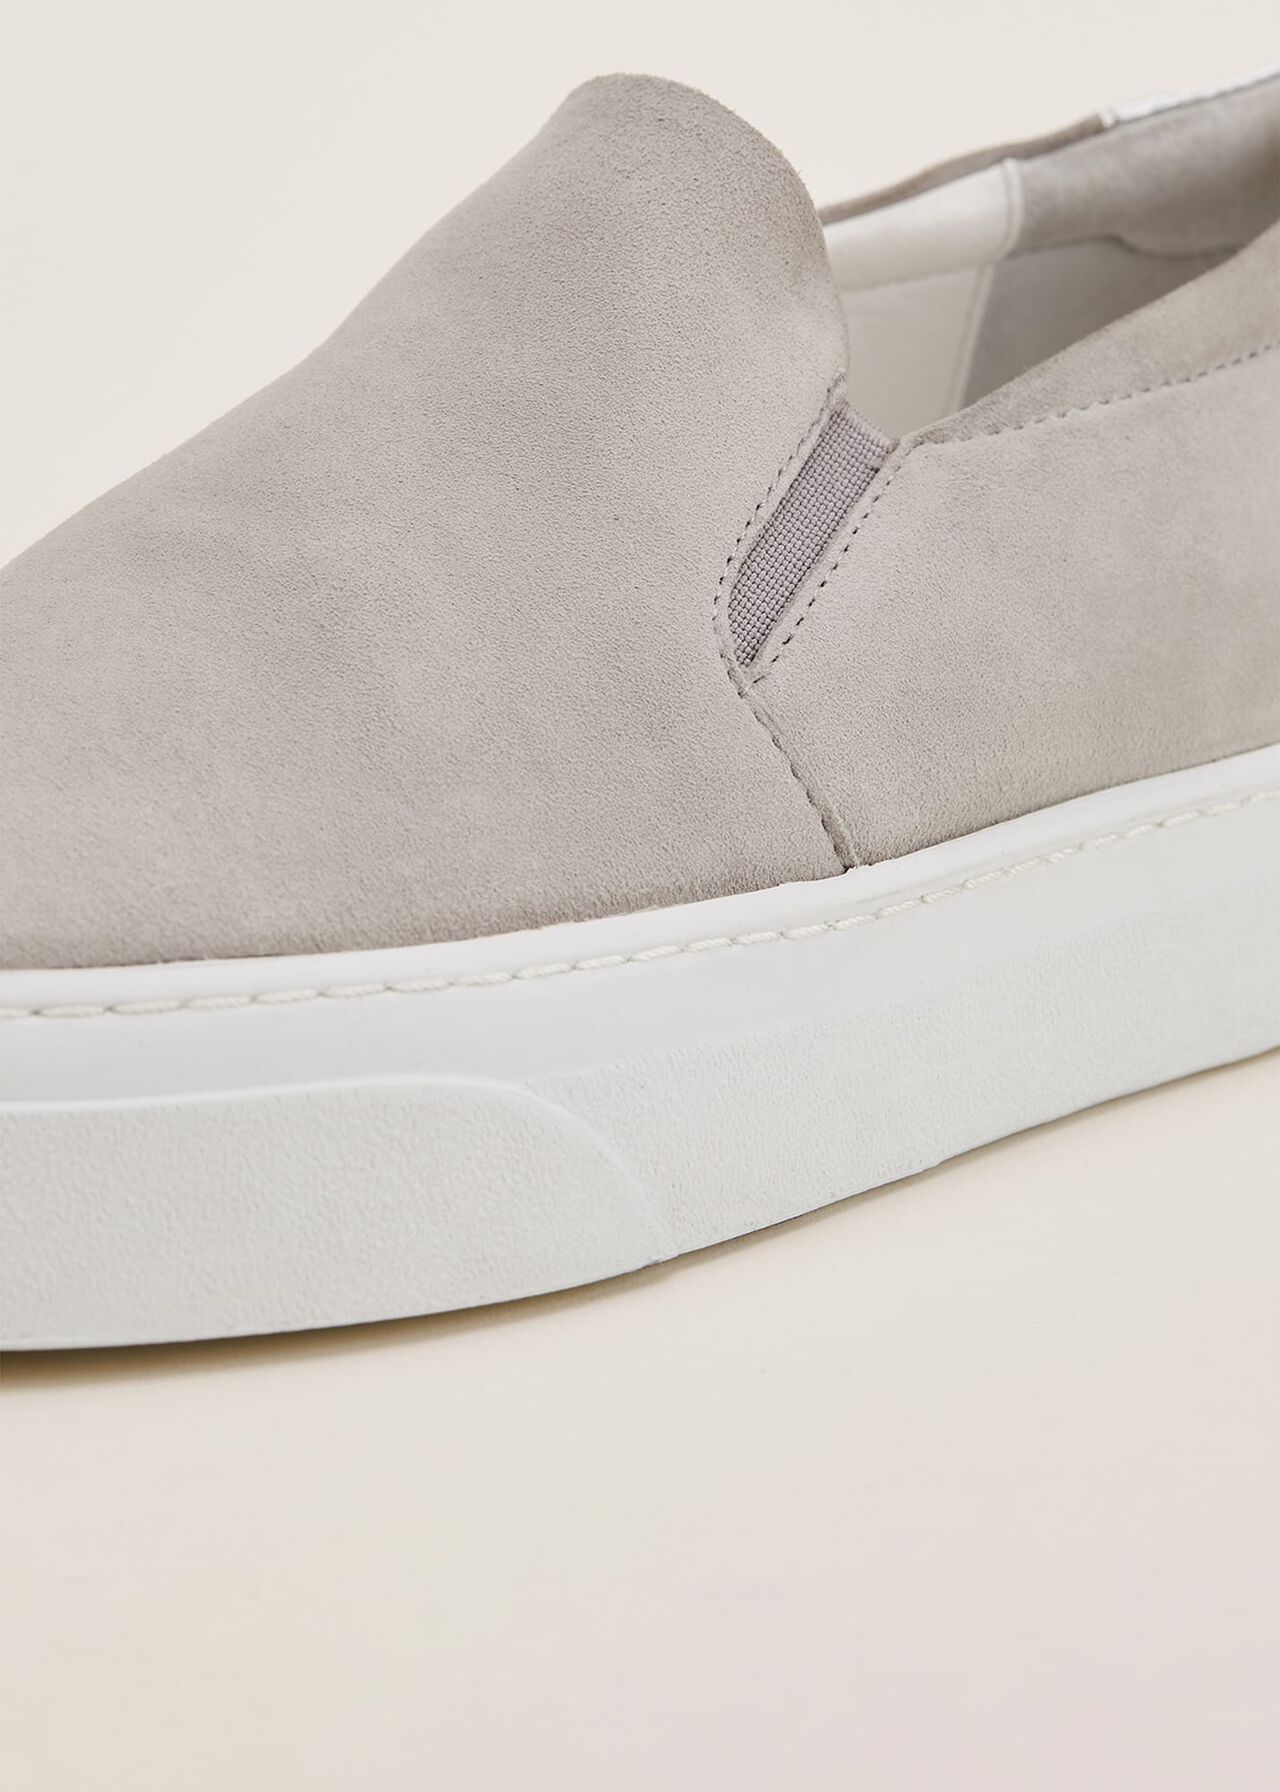 Theresa Grey Suede Slip-On Trainers